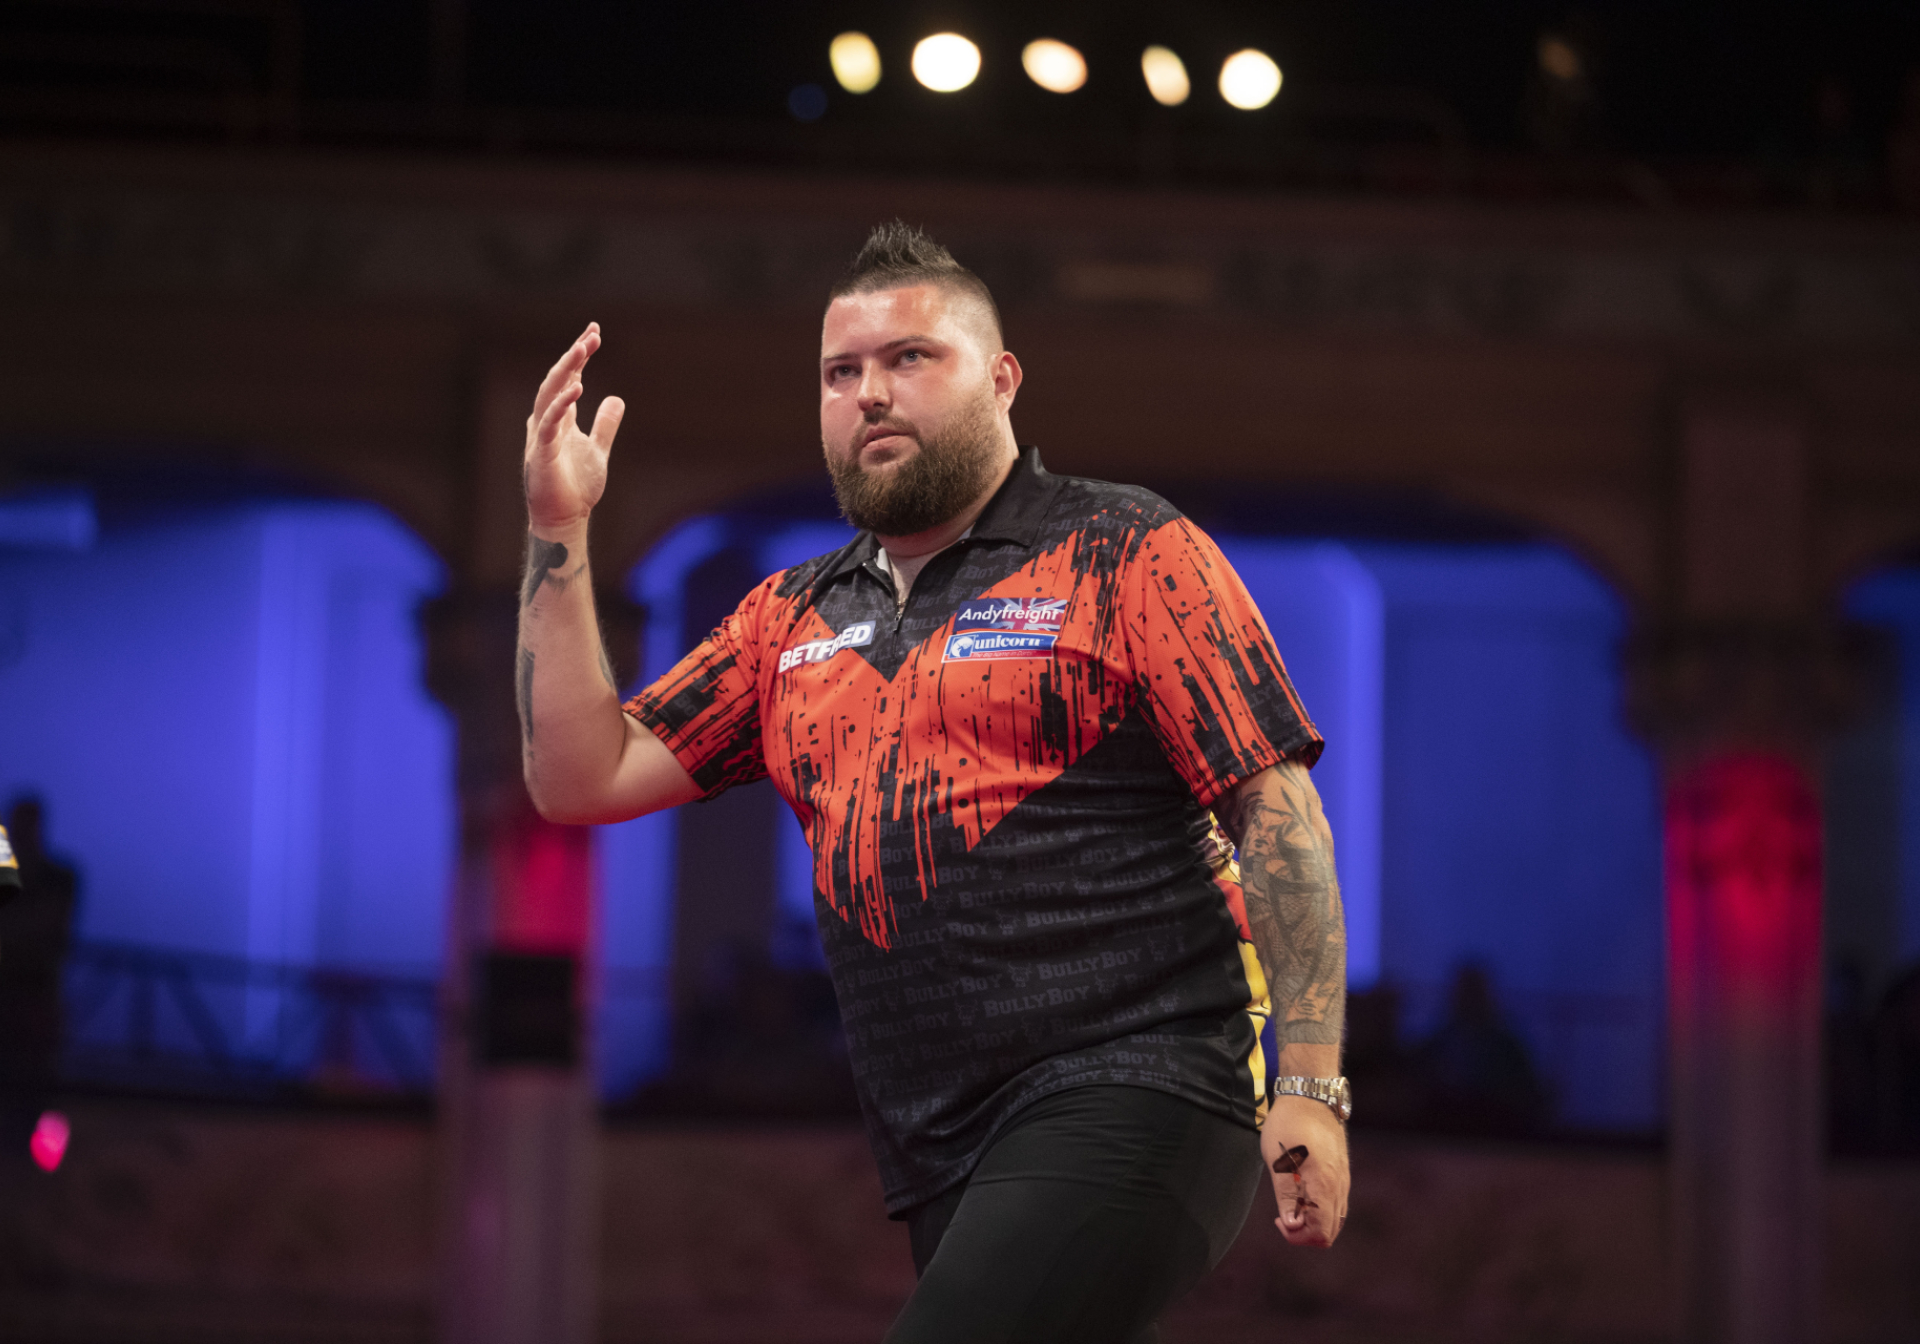 Michael Smith expresses his frustration